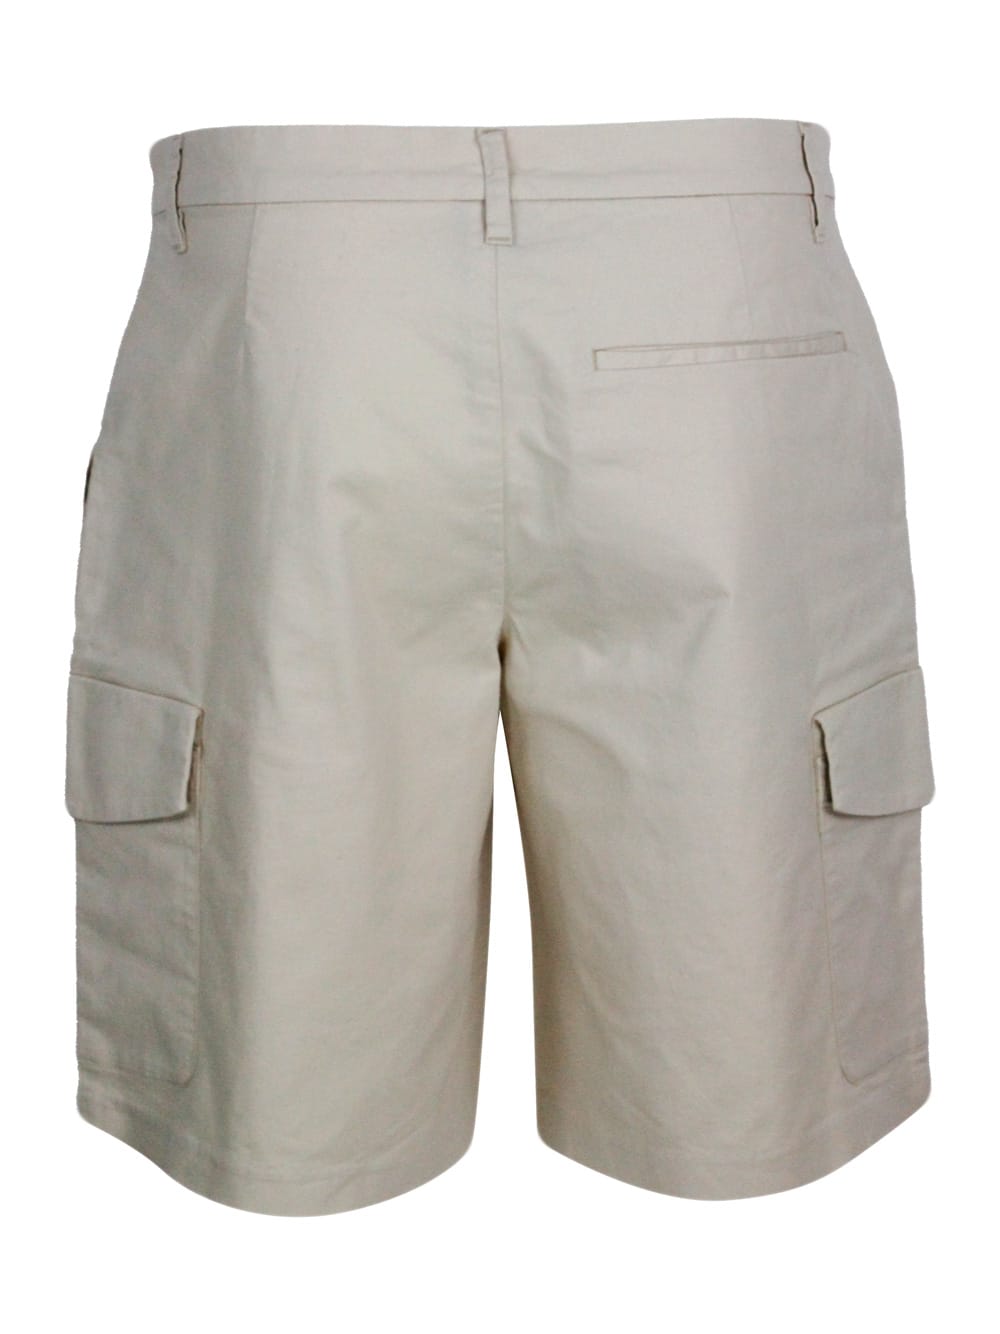 Shop Armani Collezioni Stretch Cotton Bermuda Shorts, Cargo Model With Large Pockets On The Leg And Zip And Button Closure In Beige